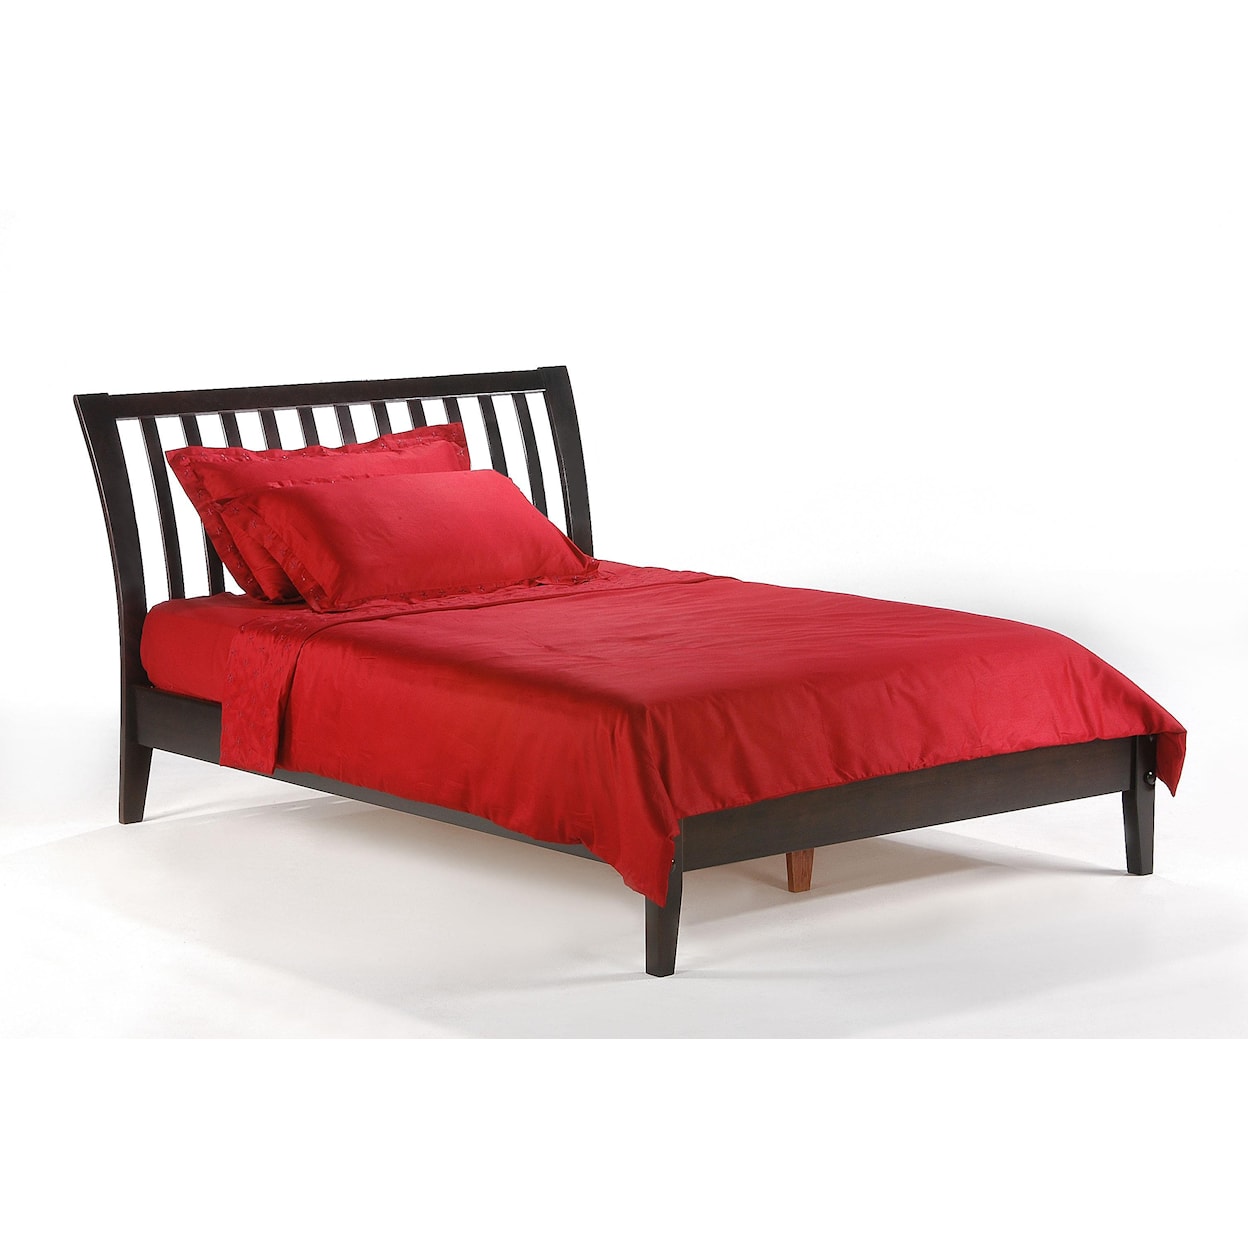 Pacific Manufacturing Nutmeg Twin Bed